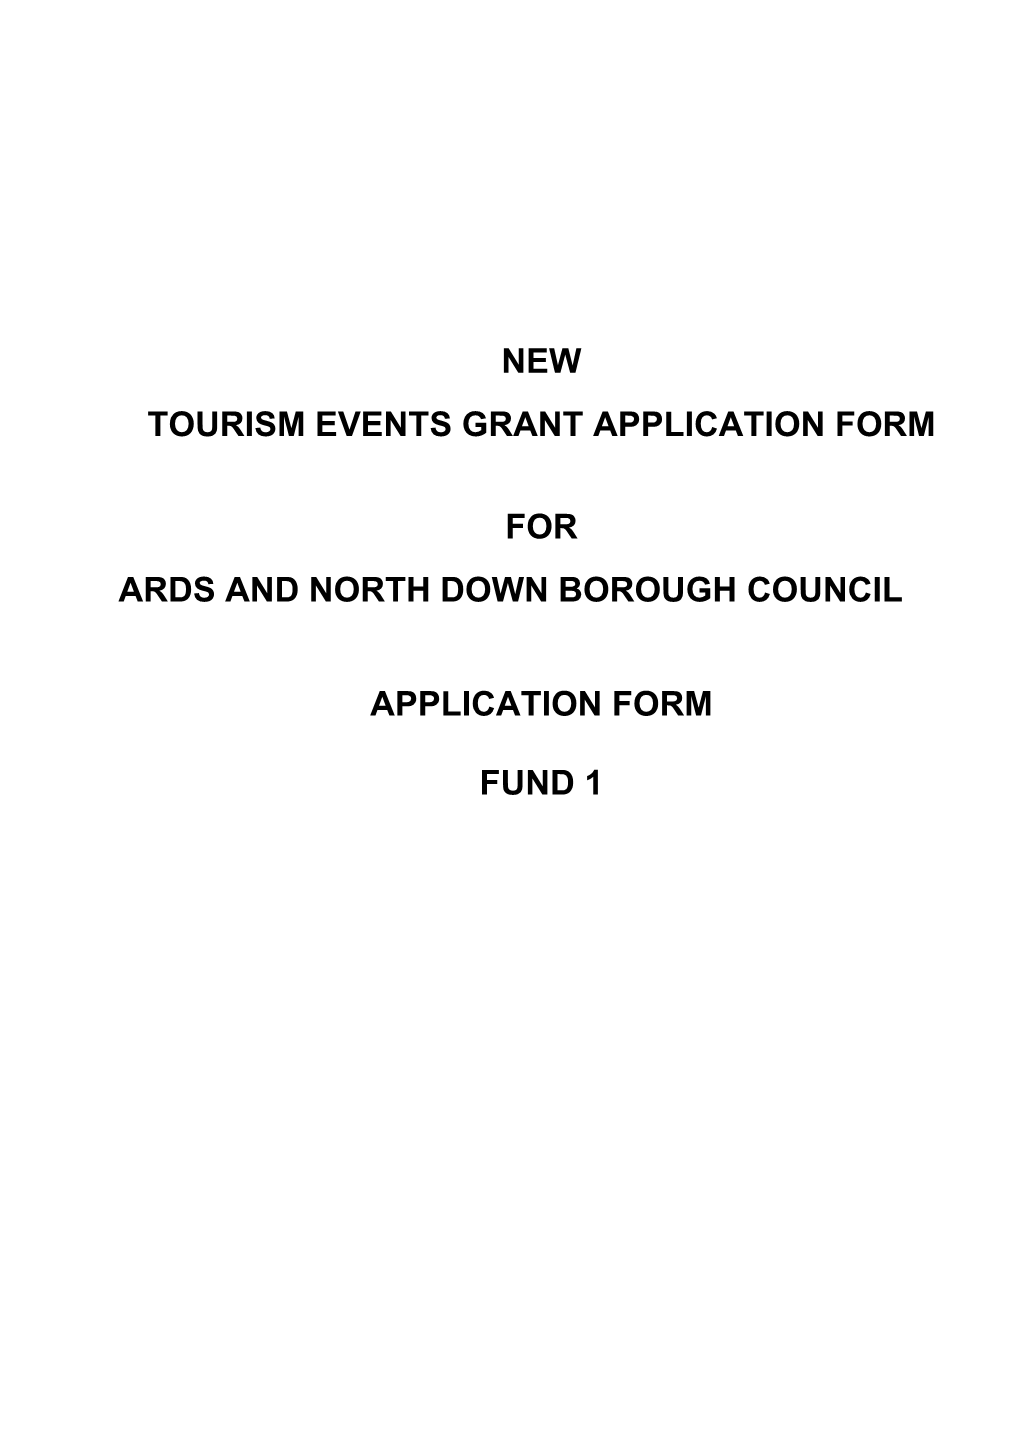 New Tourism Events Grant